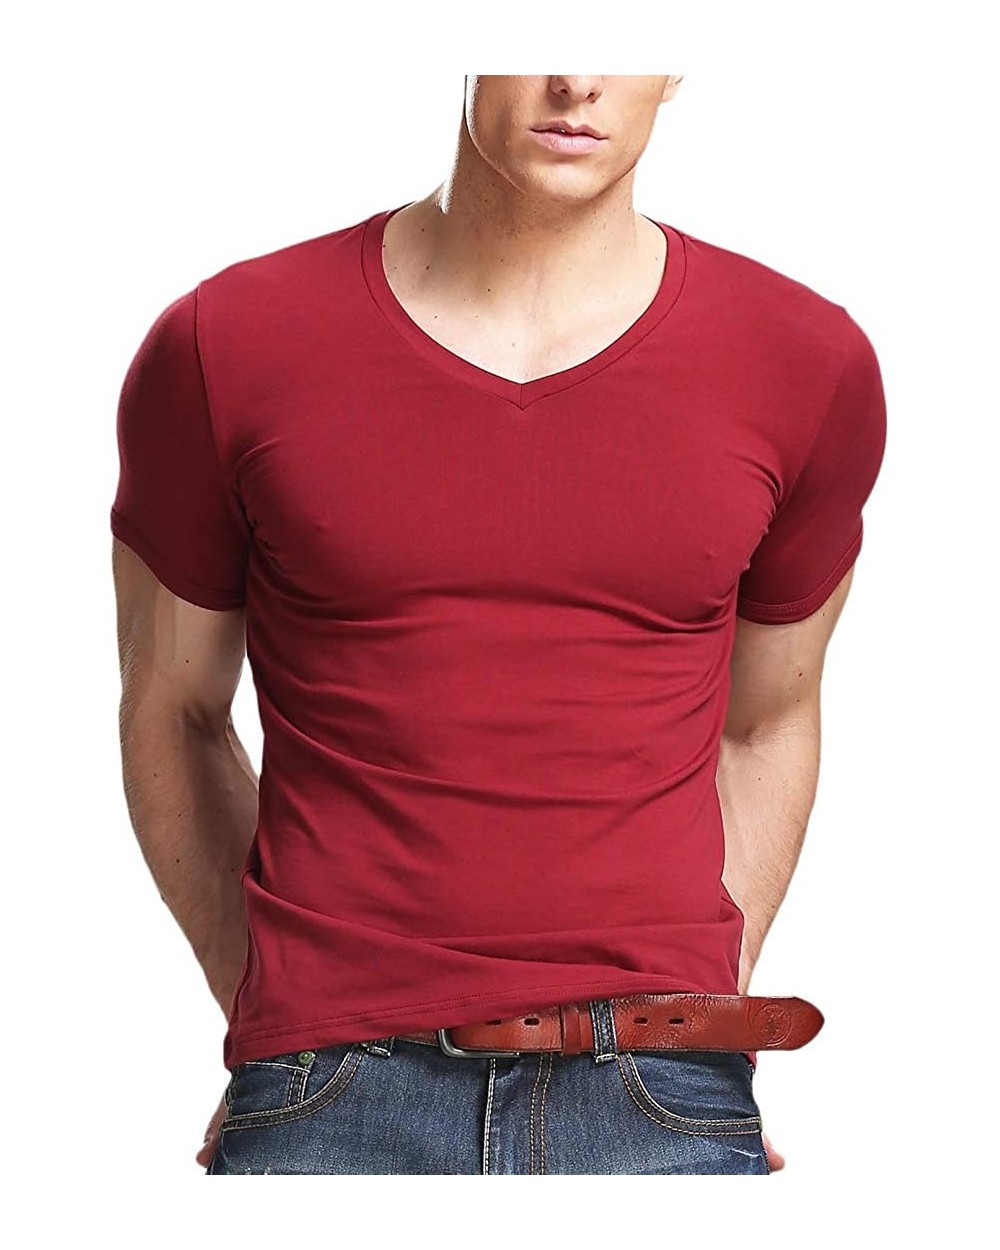 Mens Slim Fit T Shirts Soft Short Sleeves Athletic Muscle Cotton Activewear - Red - CE12KV4KNSF $26.42 Undershirts